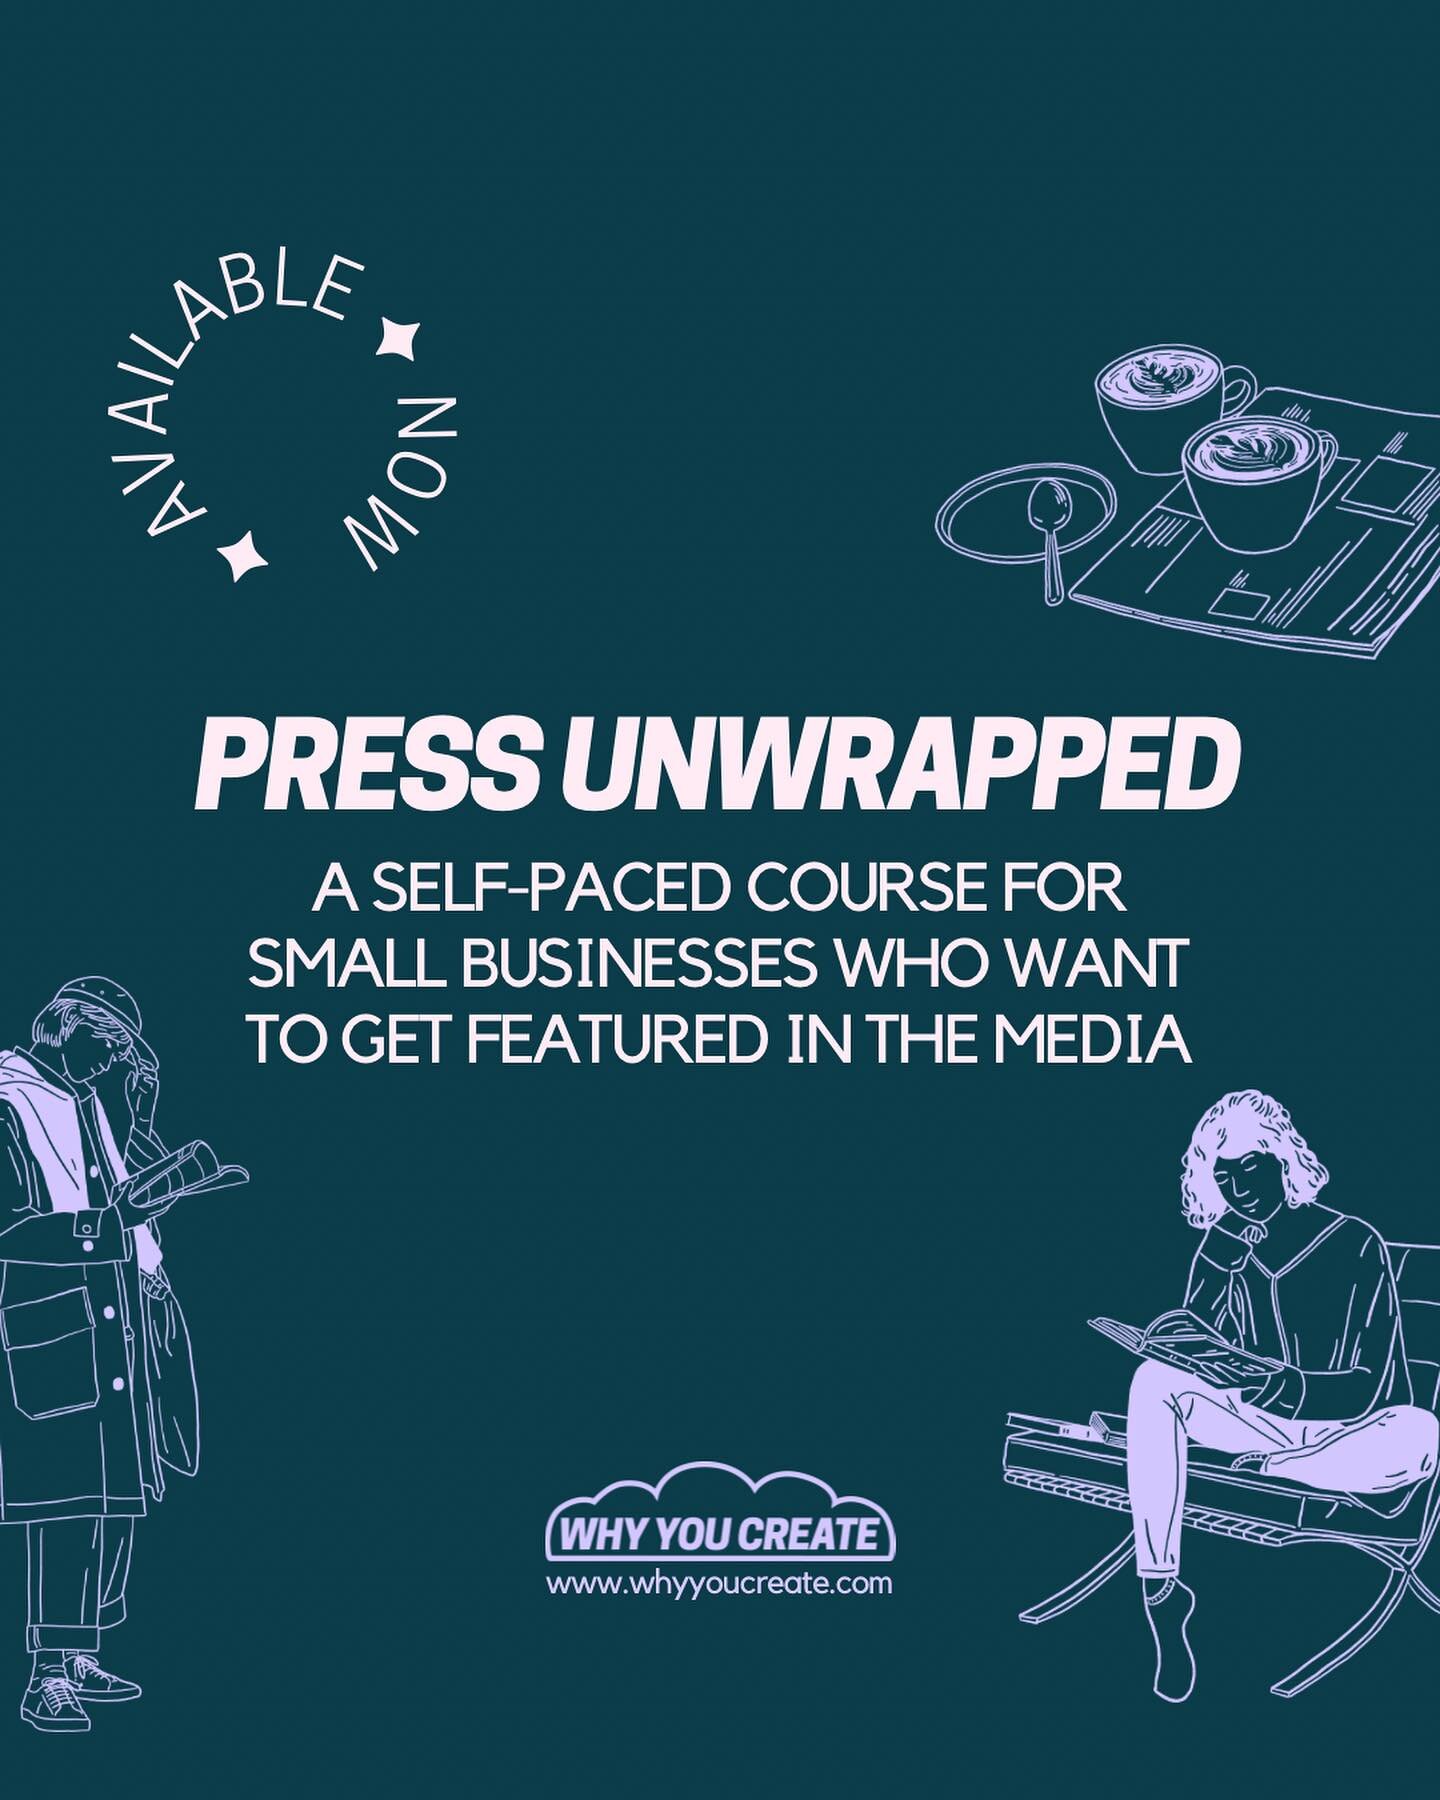 ✨NEW✨ A self-paced course to help you build your small business visibility and reputation through press features.

🗞️ PRESS UNWRAPPED 🗞️

With 6 video lessons covering the key press foundations for small businesses, the course is packed with action